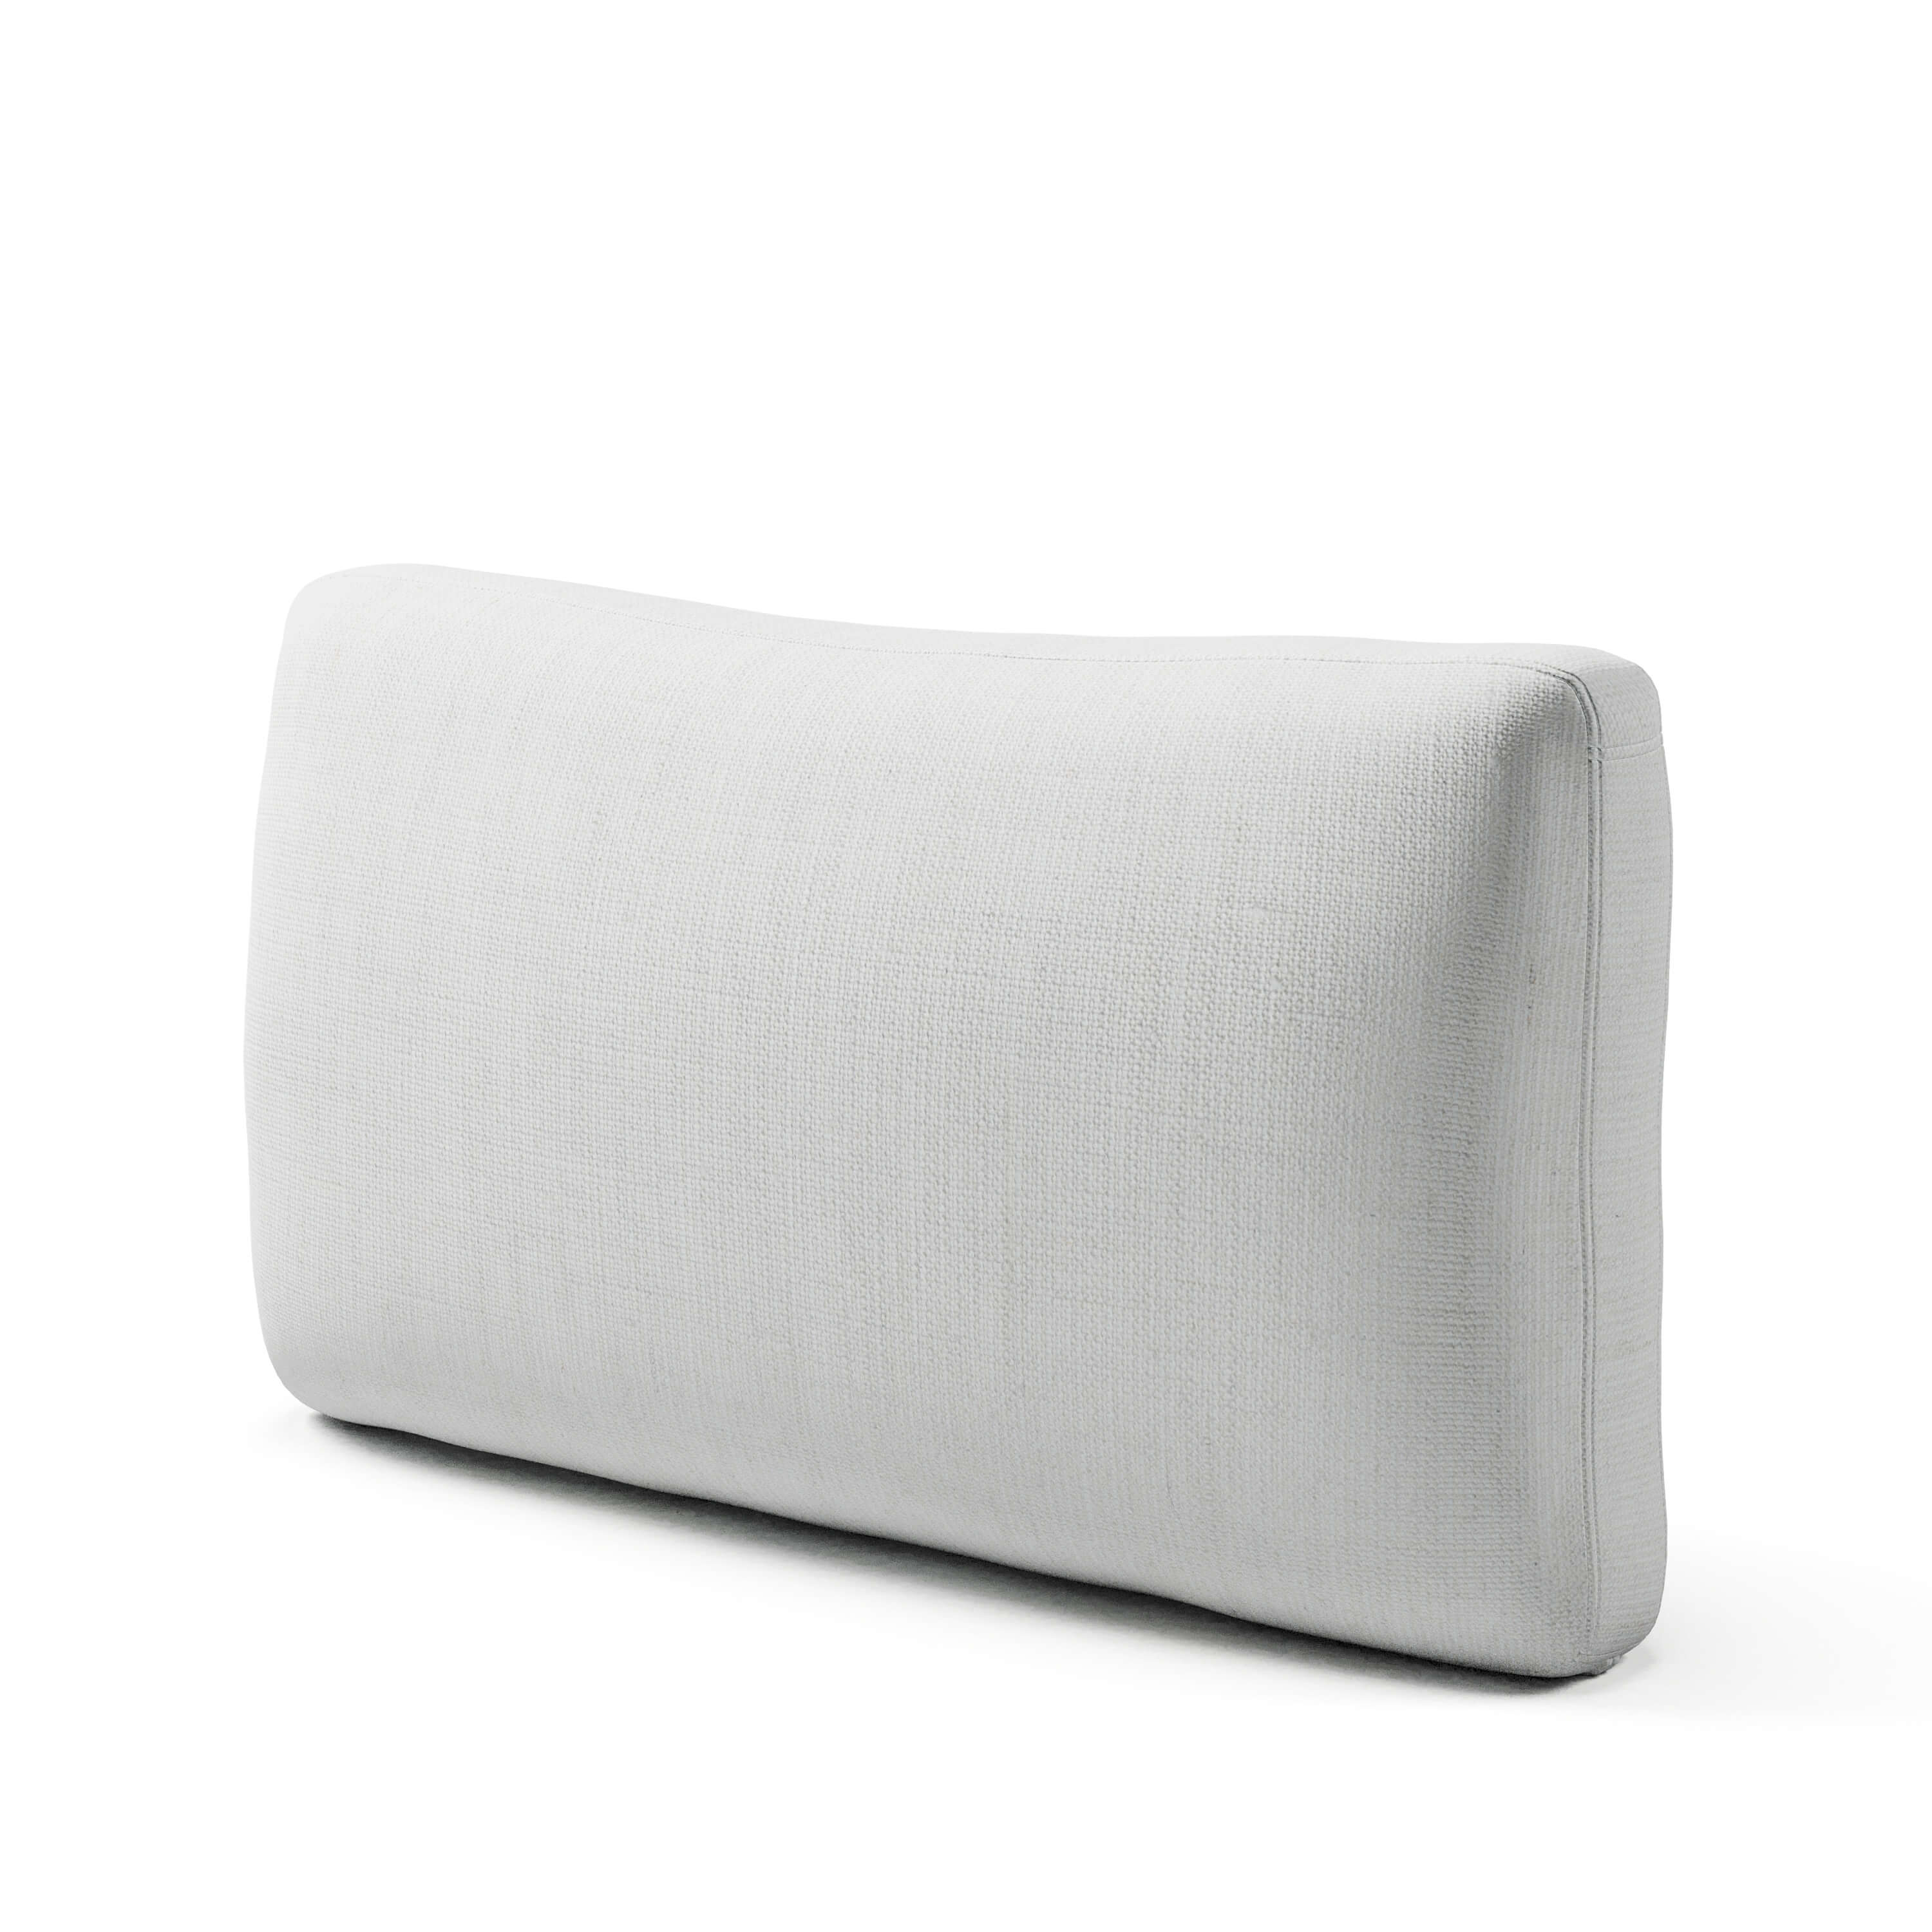 Comfy Sofa - Back Cushion Slipcover Replacement